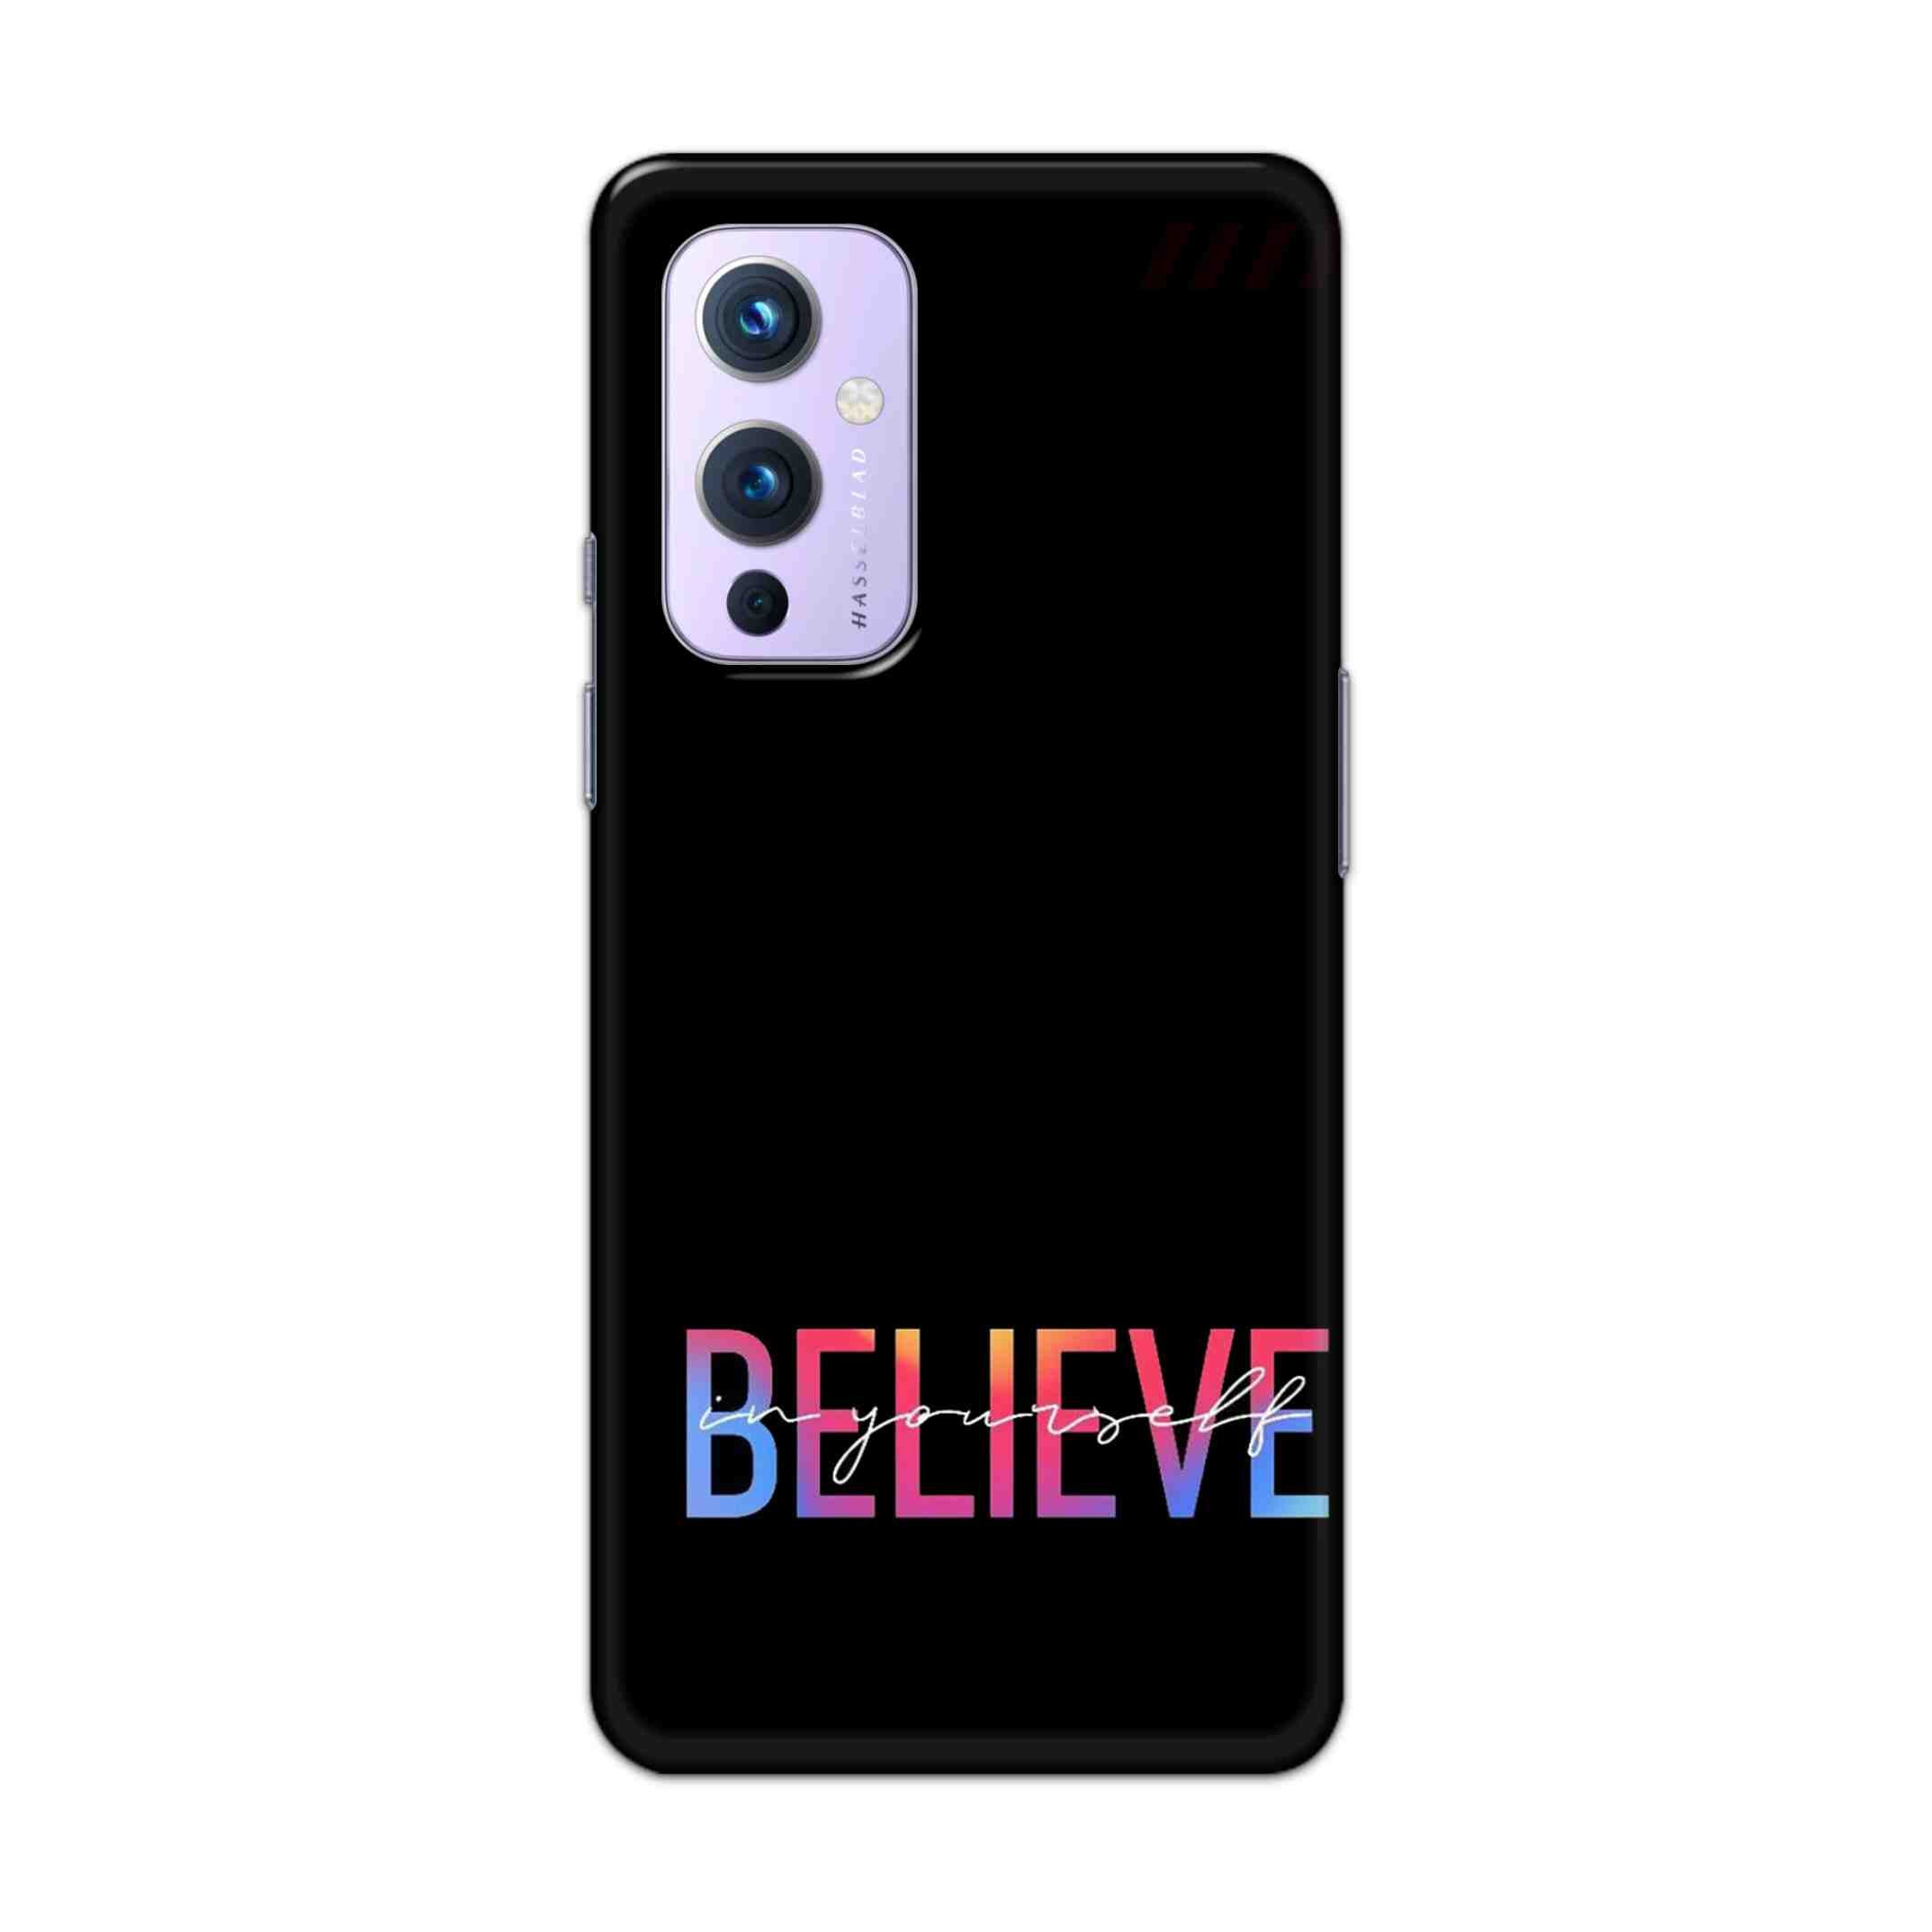 Buy Believe Hard Back Mobile Phone Case Cover For OnePlus 9 Online